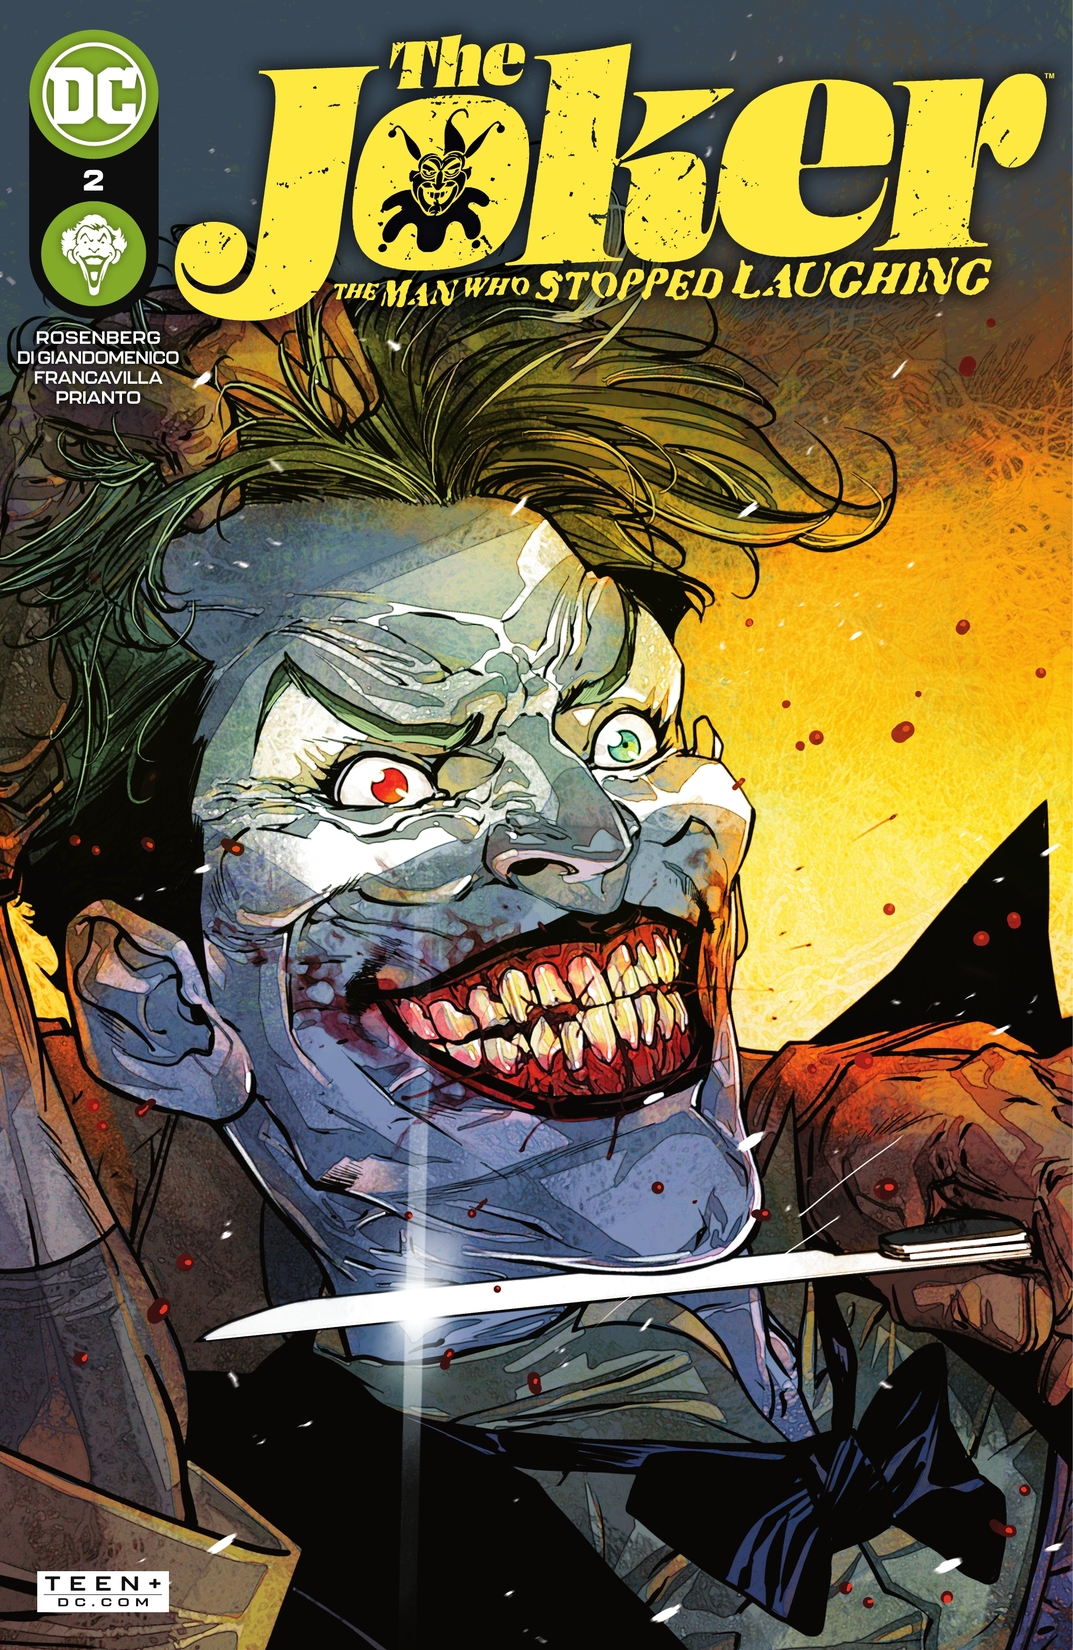 The Joker: The Man Who Stopped Laughing #2 preview images